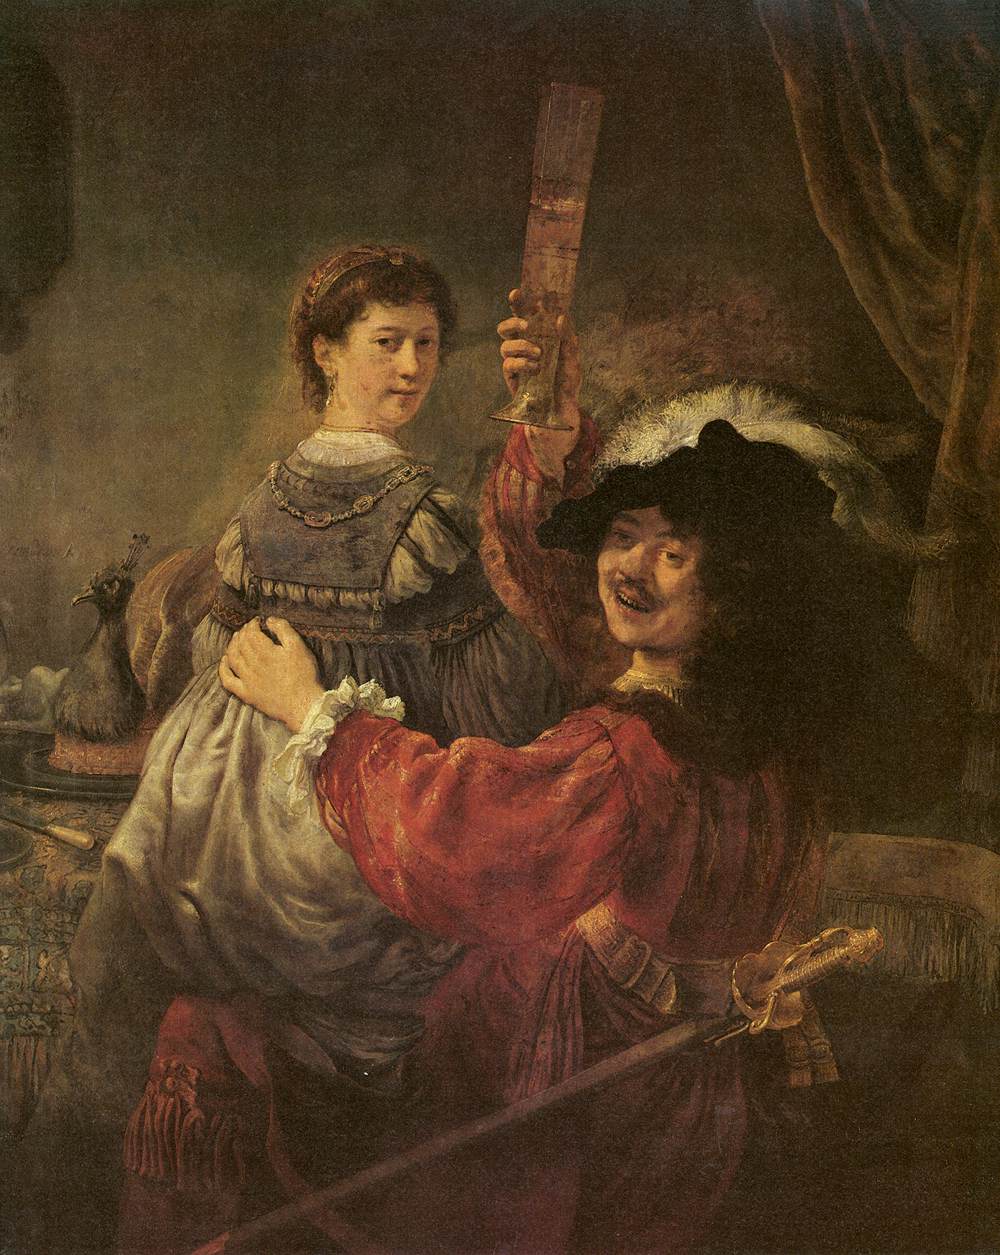 Rembrandt And Saskia In The Scene Of The Prodigal Son In The Tavern by Rembrandt